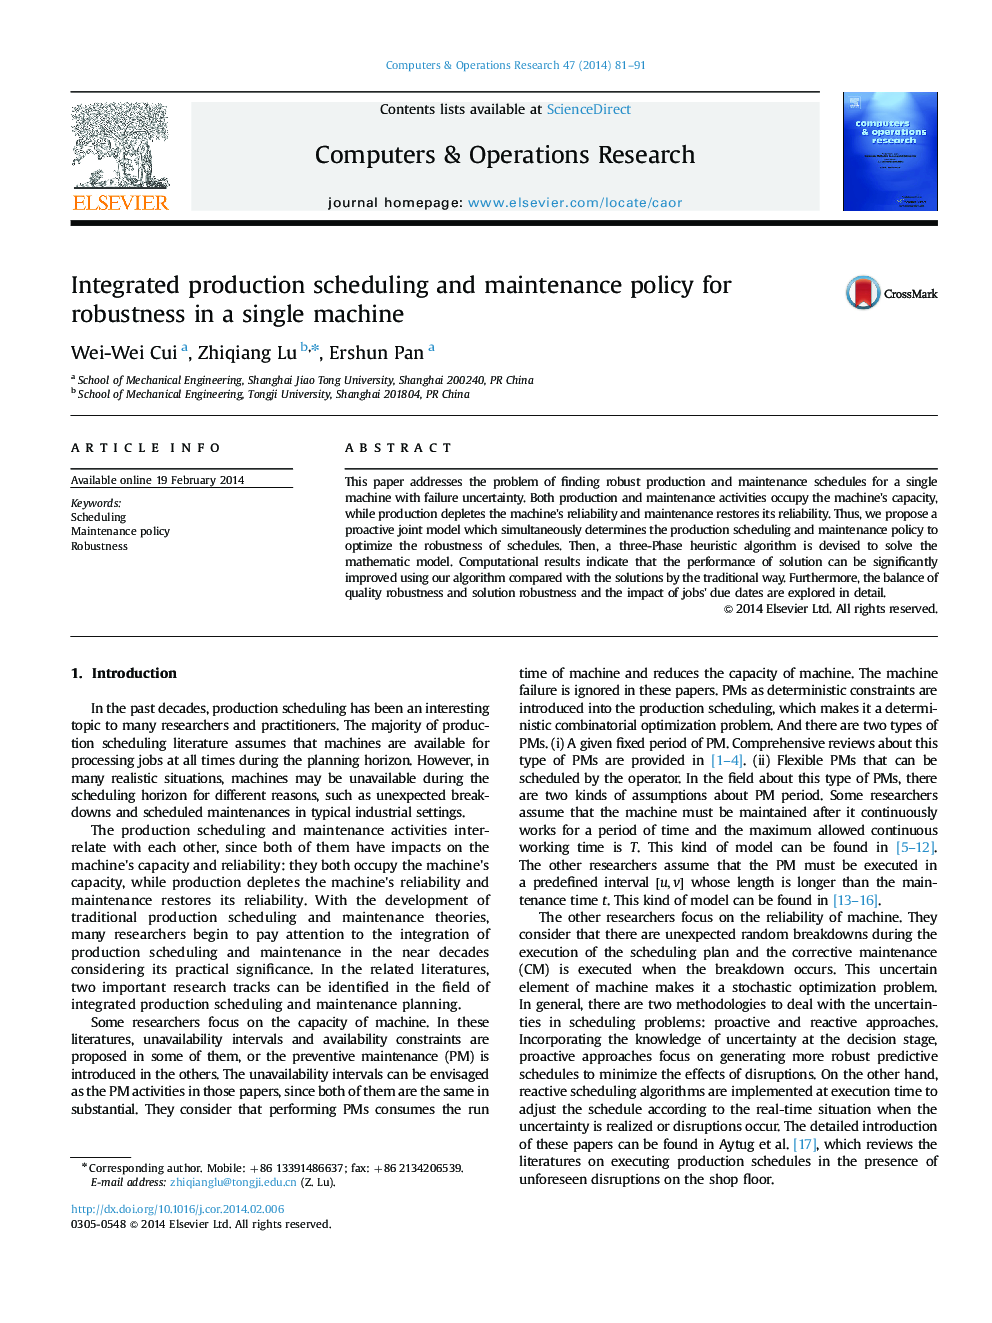 Integrated production scheduling and maintenance policy for robustness in a single machine